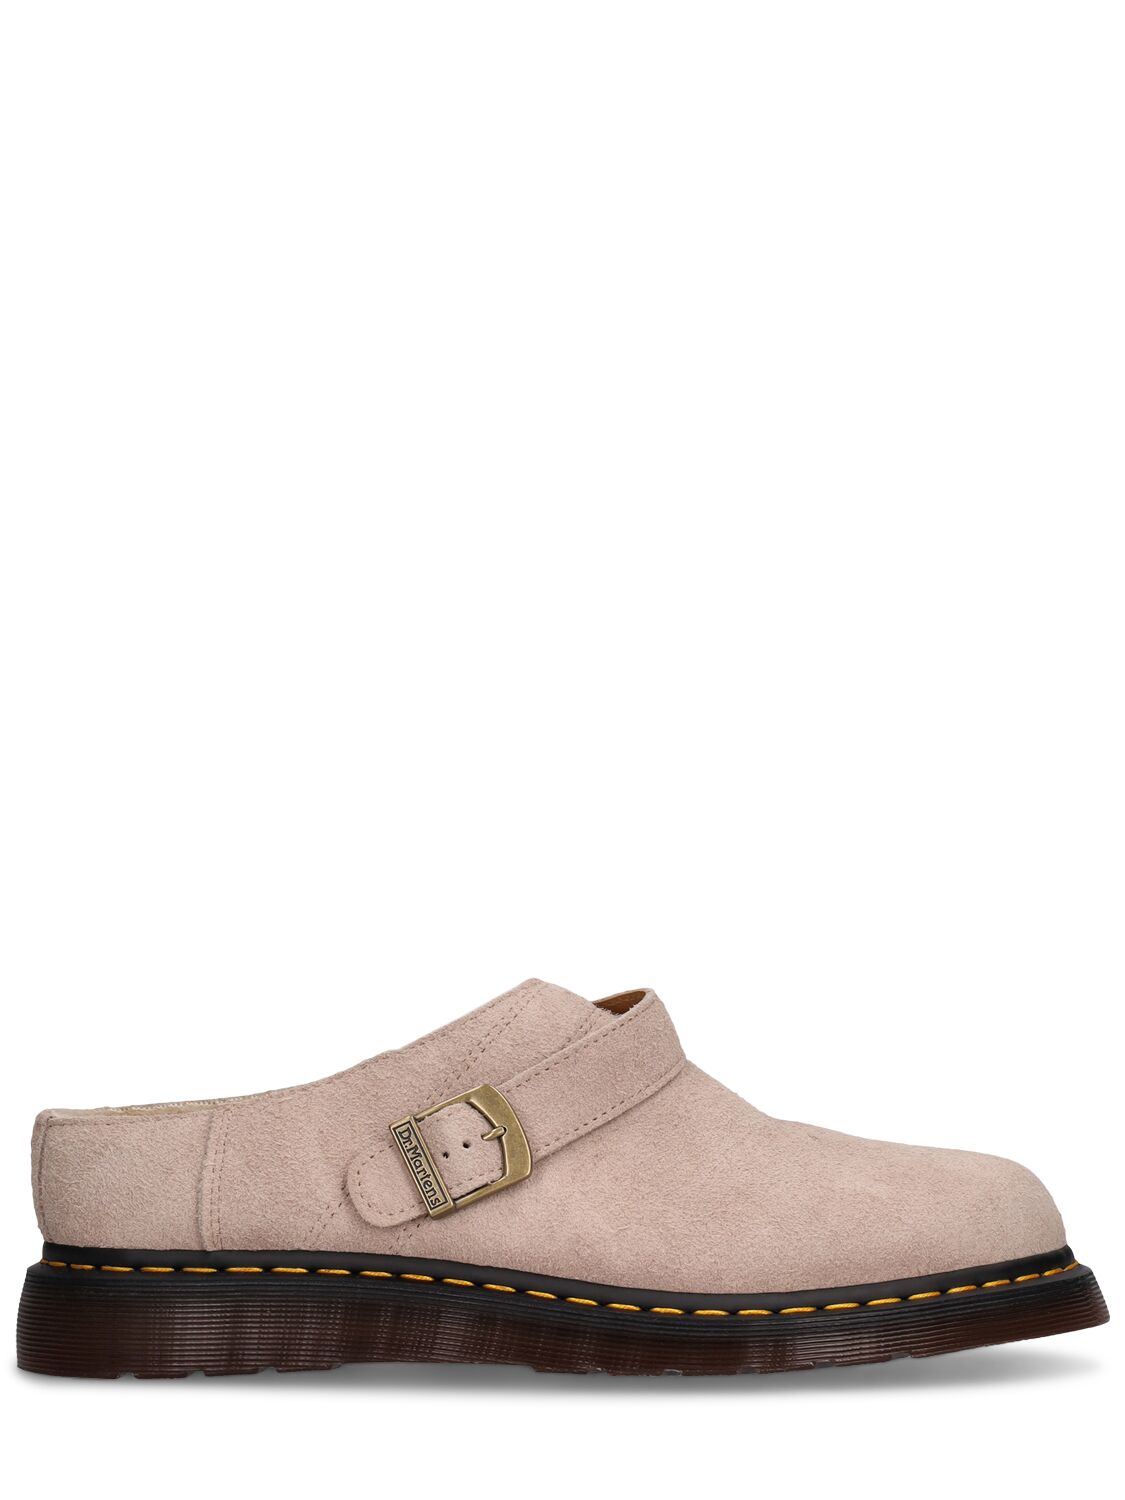 Dr. Martens' Archive Isham Suede Slip-on Mules In Neutral